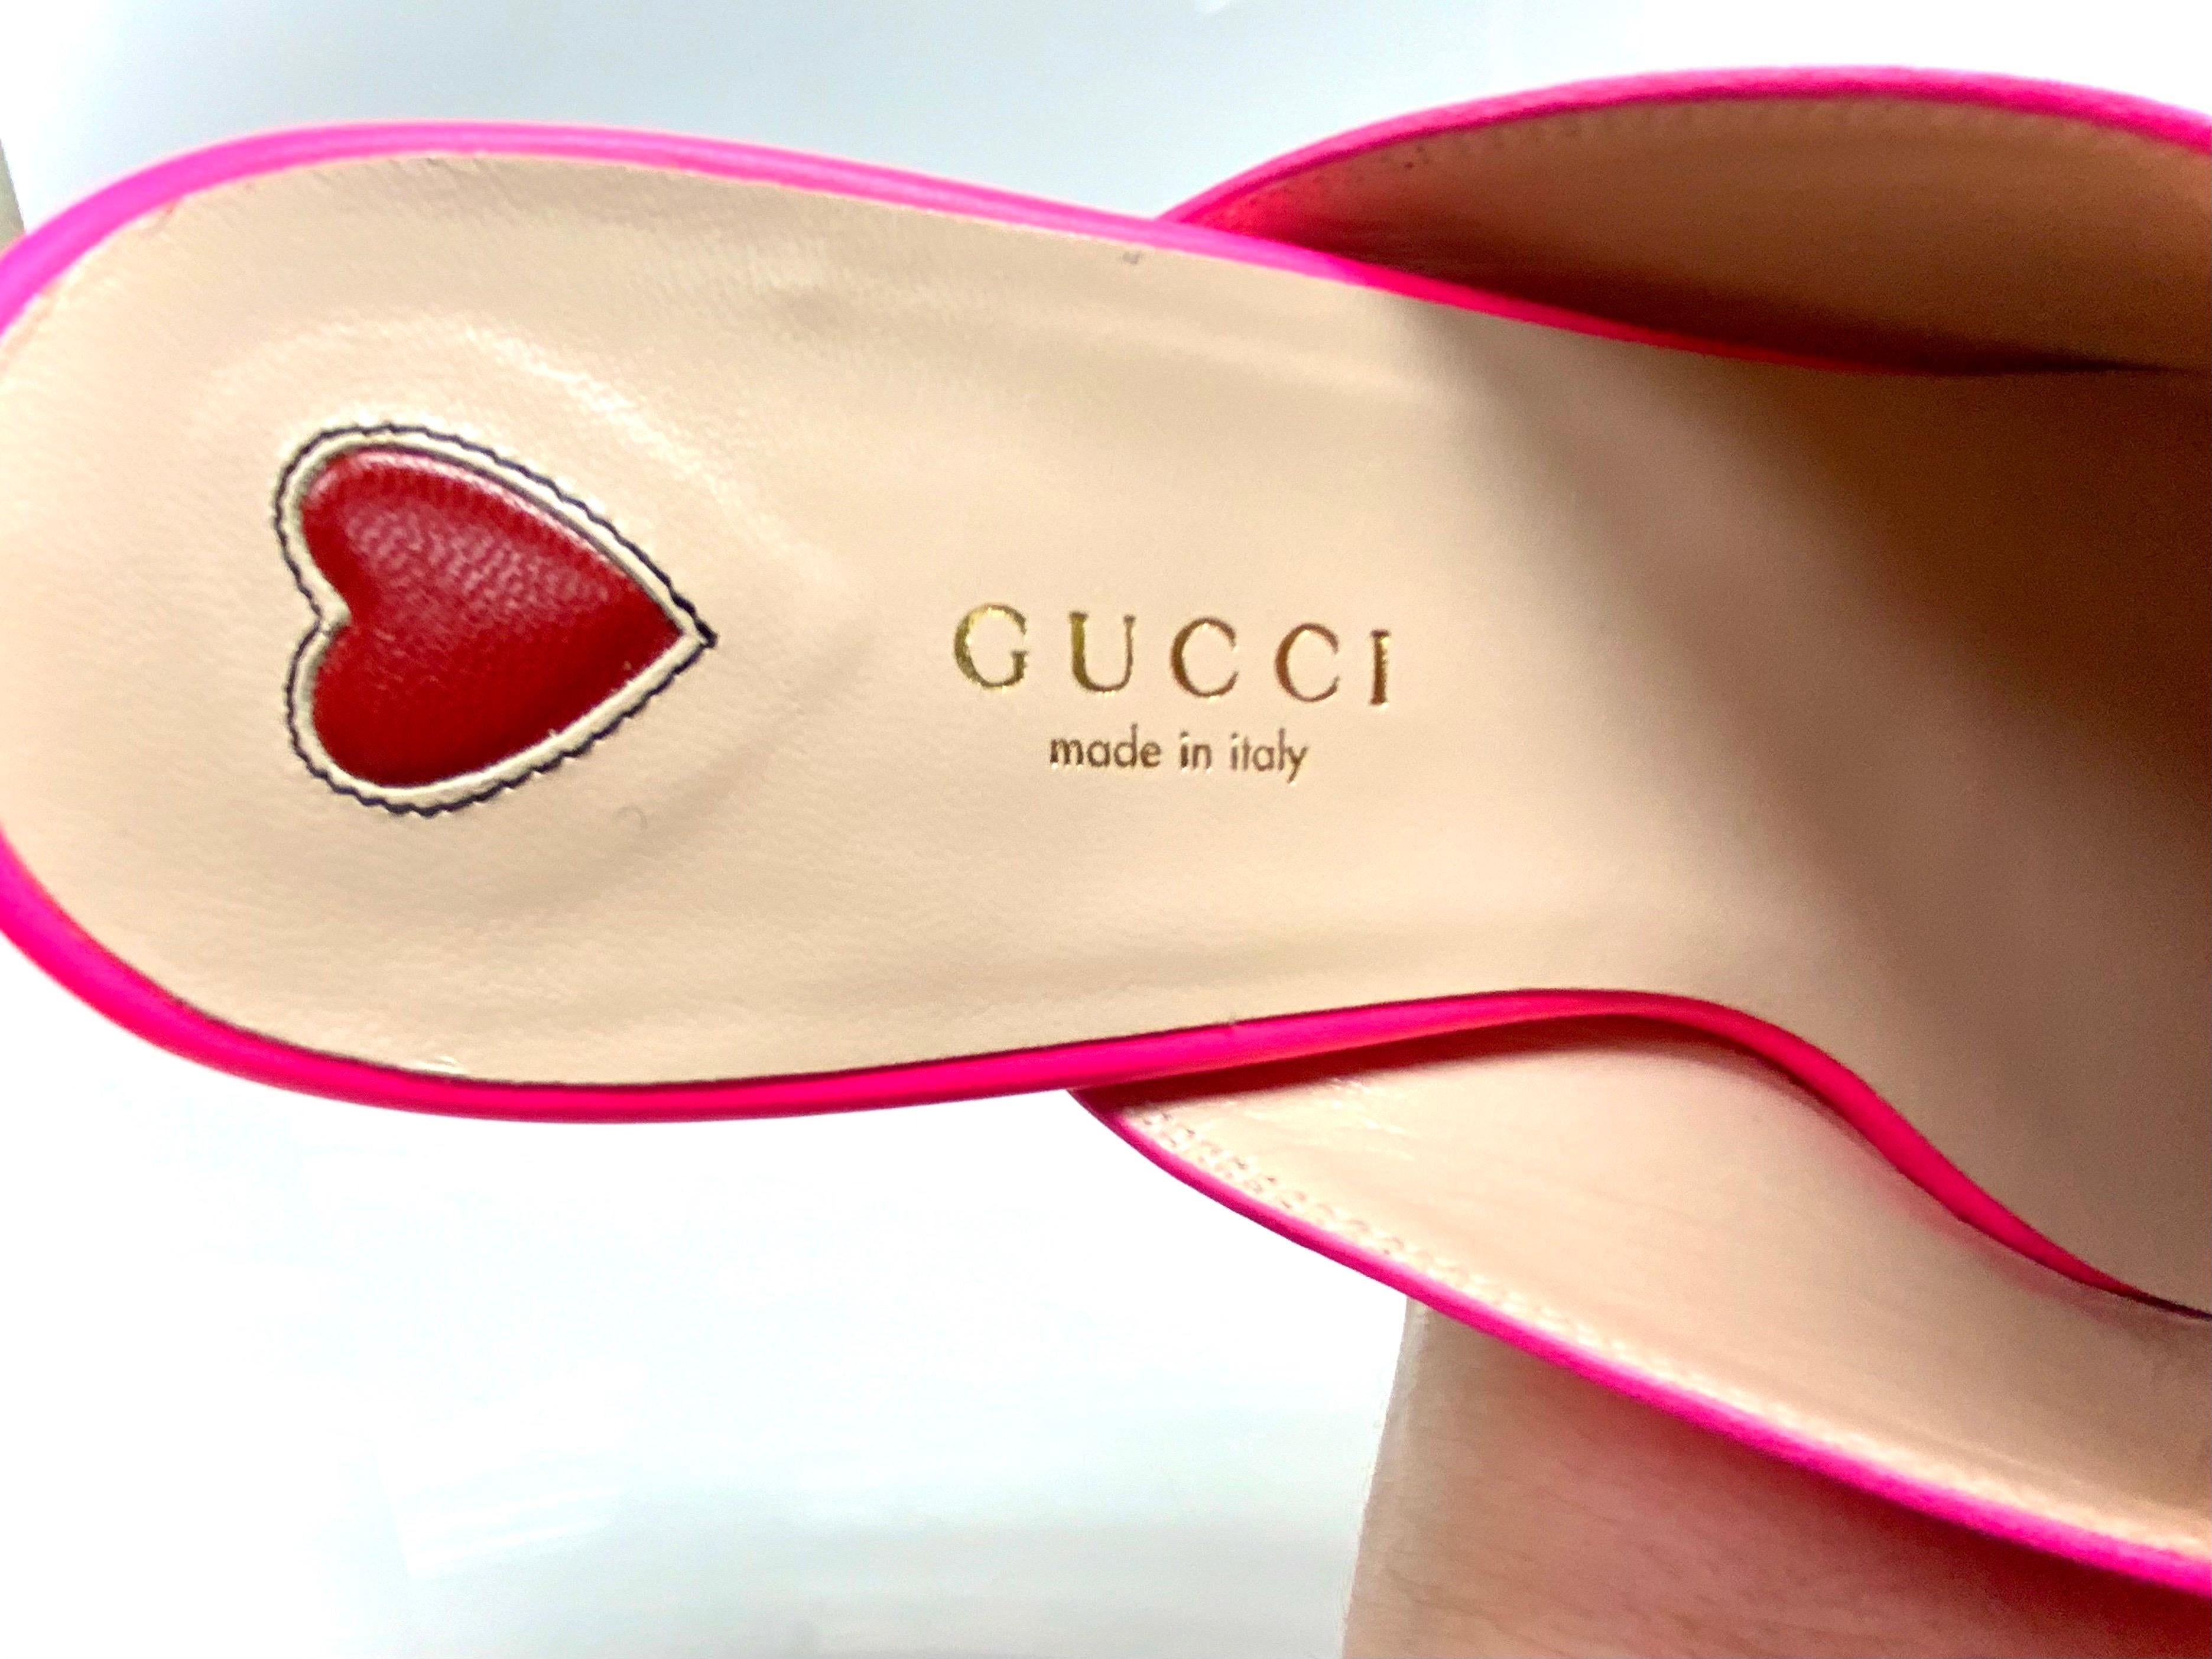 Women's or Men's Gucci Princetown Mules Loafer Slides Pink Size 38/ US 7.5- NEW NEVER WORN